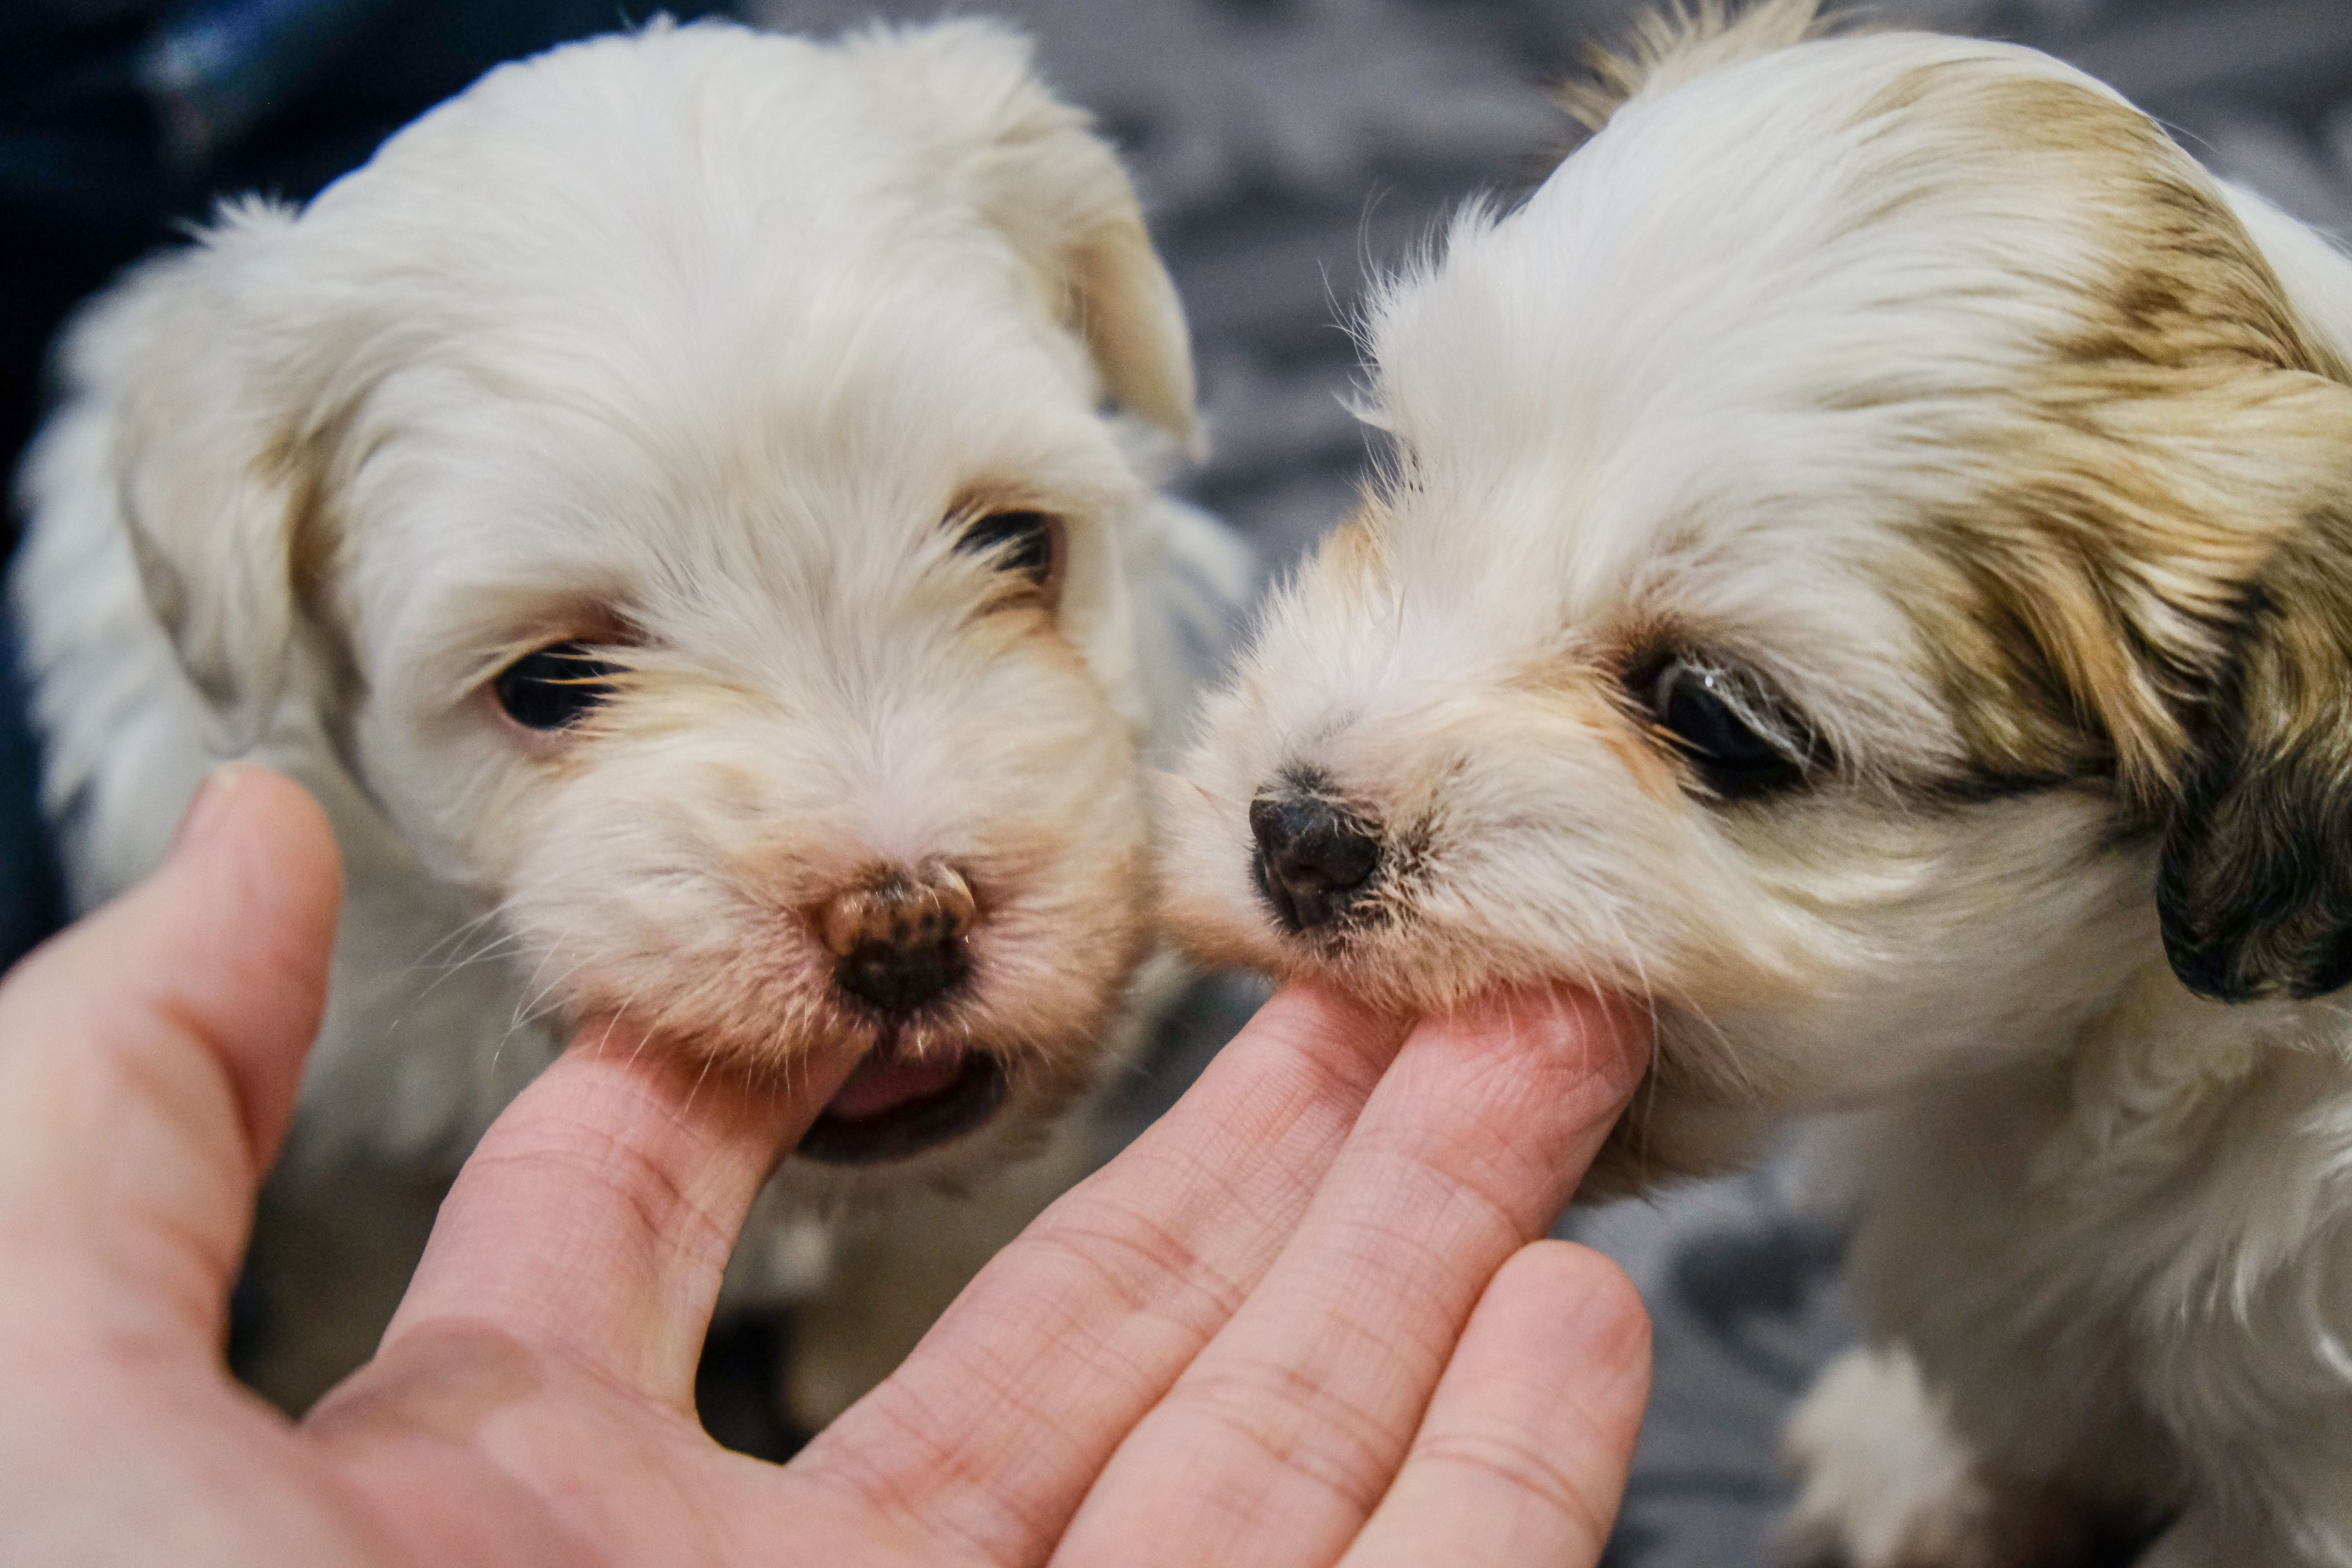 do teething puppies eat less